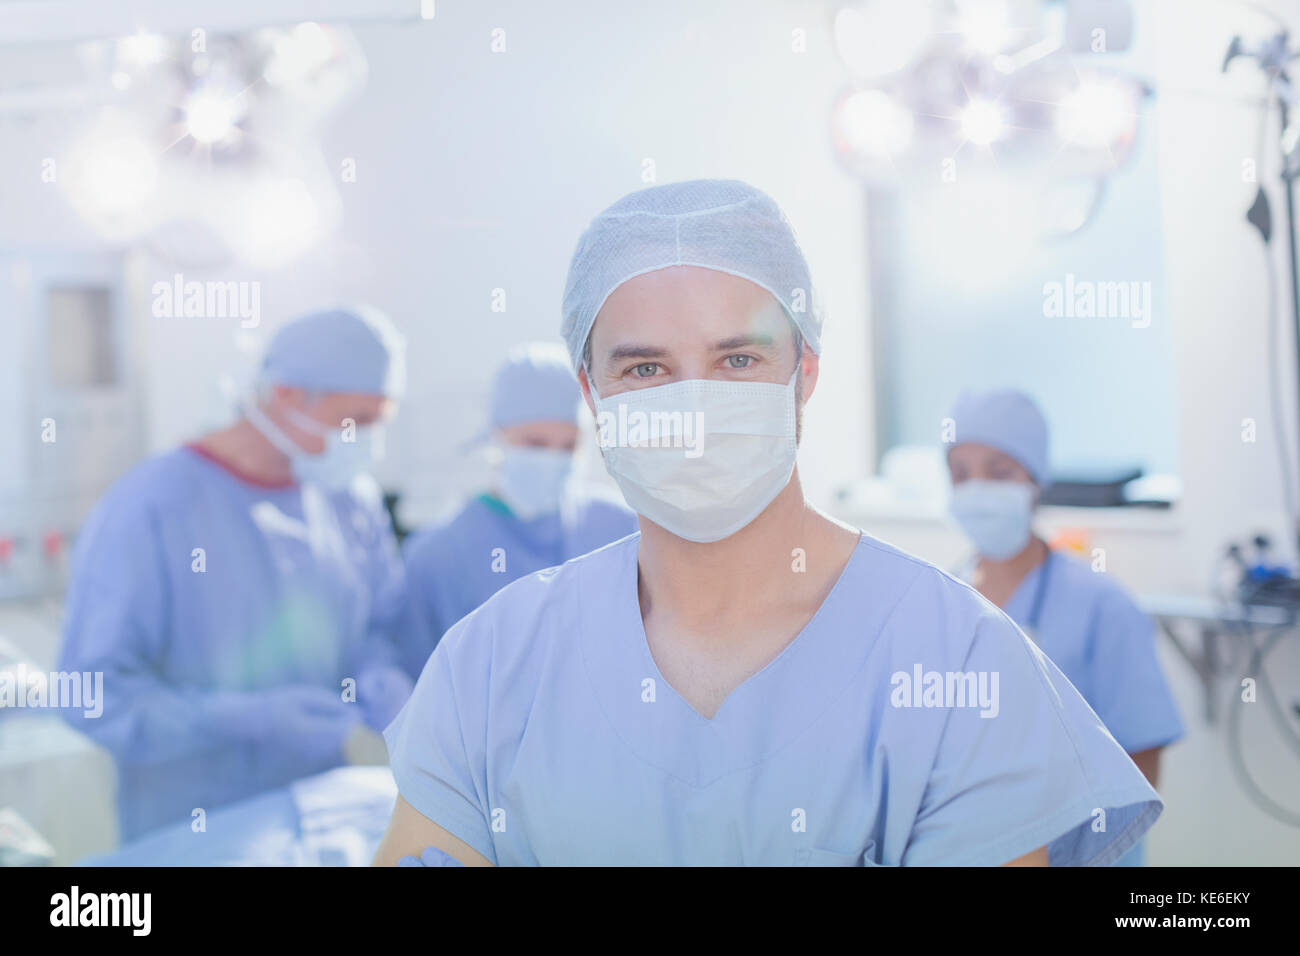 Portrait confident young male surgeon wearing surgical mask in operating room Stock Photo